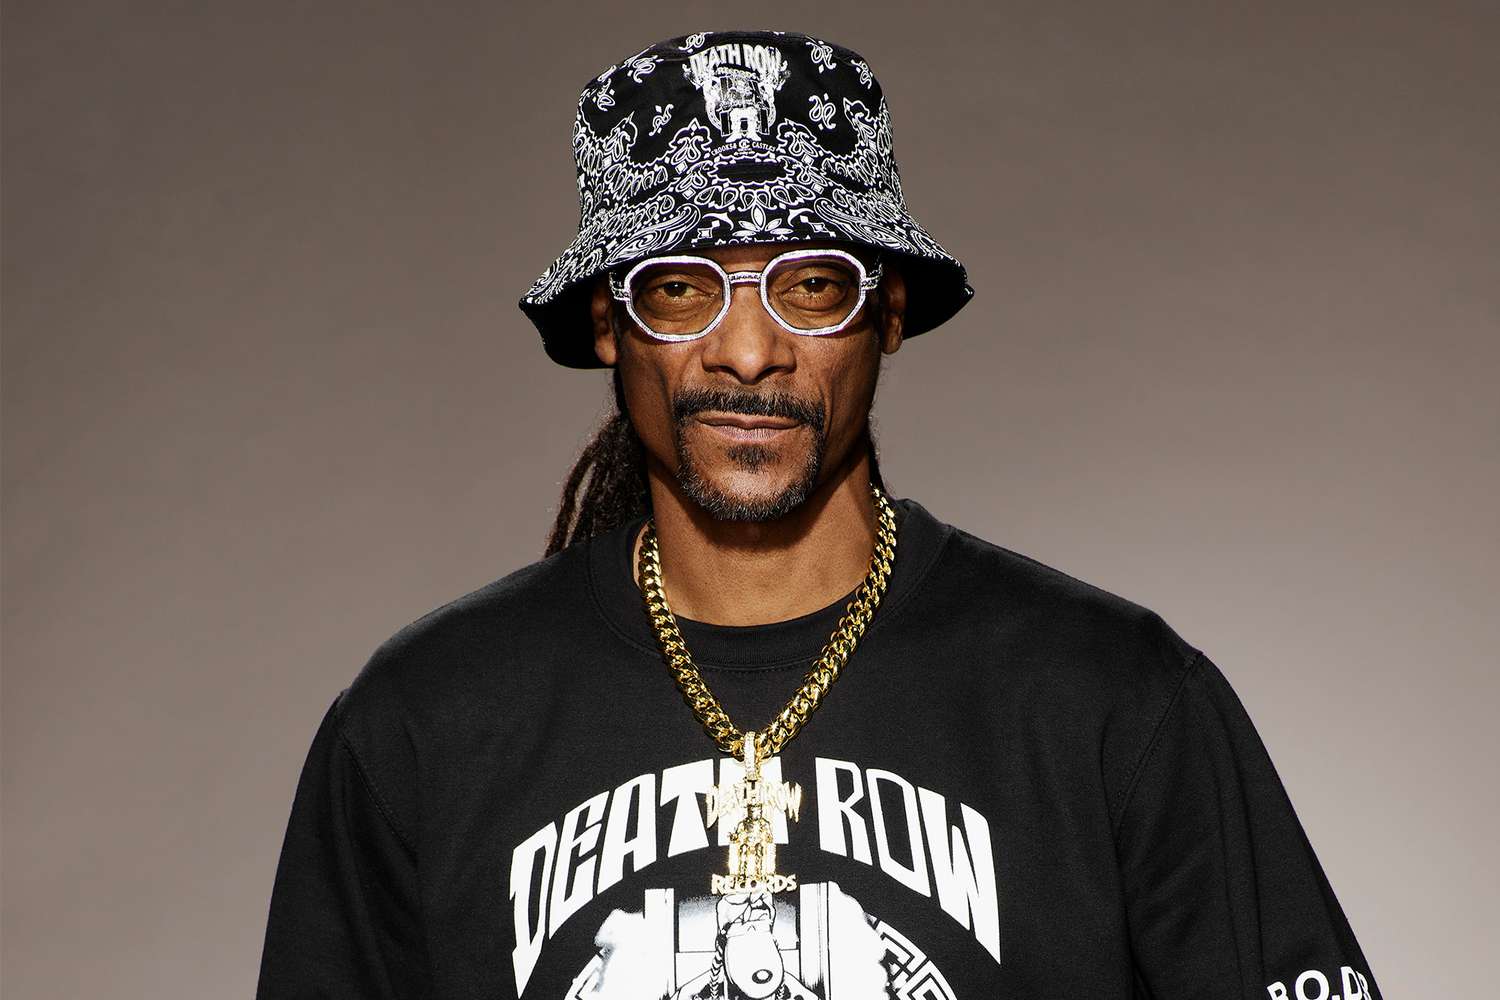 Snoop Dogg Announces He’s Giving Up Smoking After Consulting With His Family